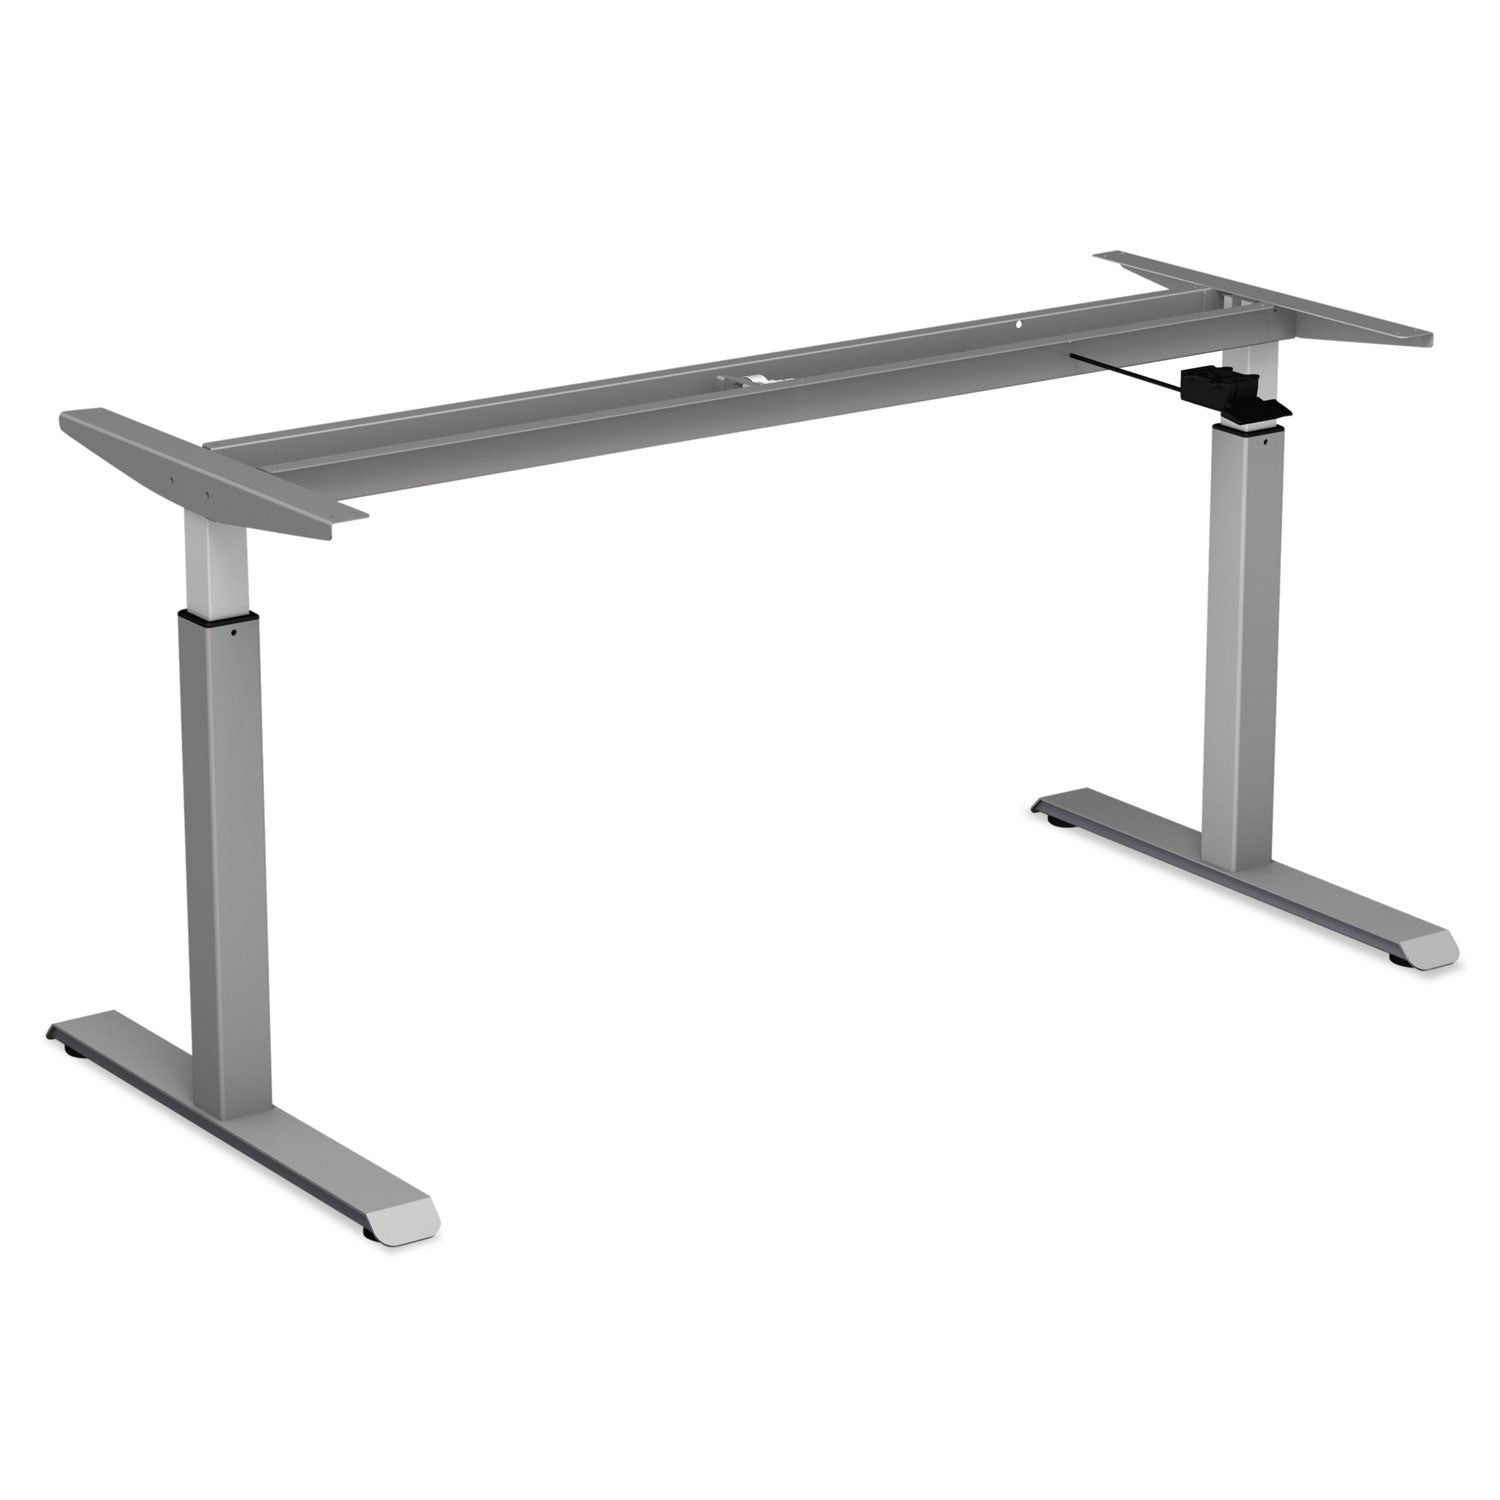 adaptivergo-sit-stand-pneumatic-height-adjustable-table-base-5906-x-2835-x-2618-to-3957-gray_alehtpn1g - 1